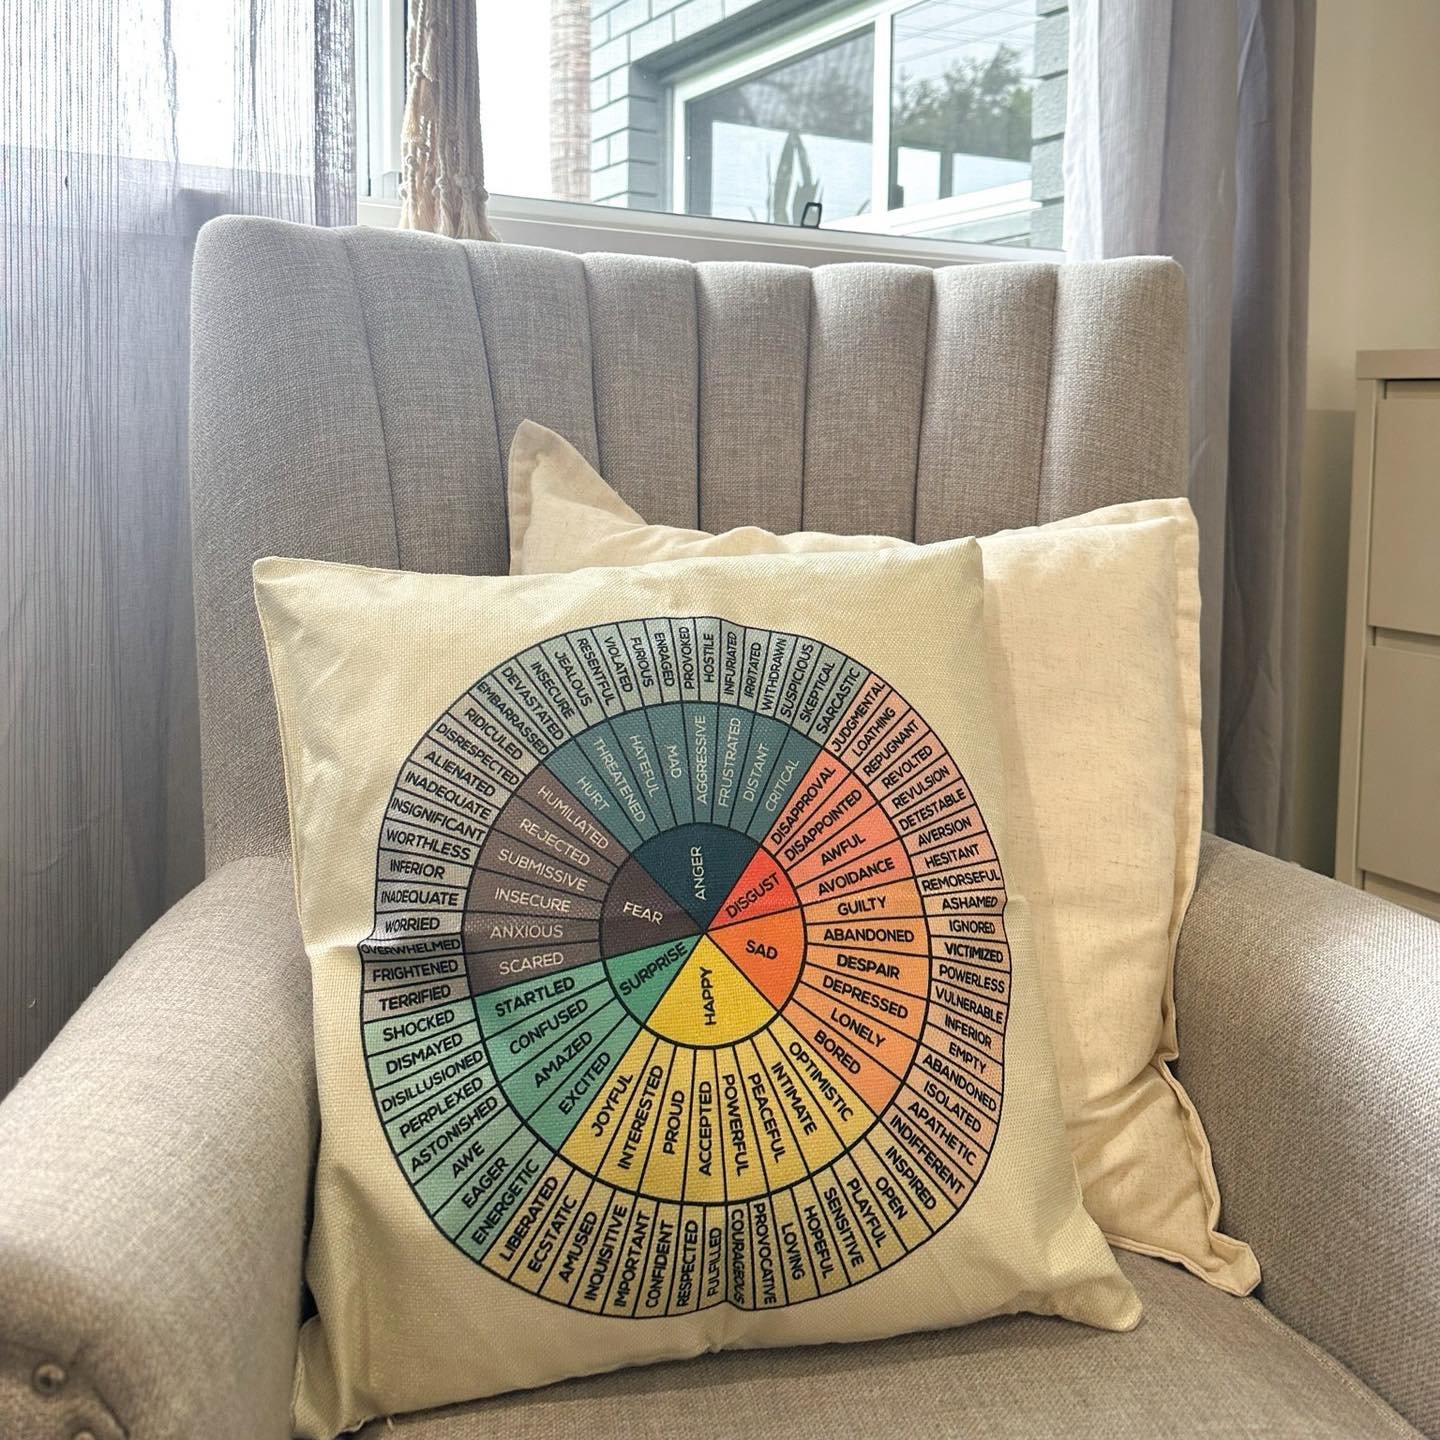 How cool is this feelings wheel cushion that Stacey from @lotus.embodiedtherapy brought in!

There really are SO many ways to describe how you feel 💛🩵🩷❤️🤍💜💚